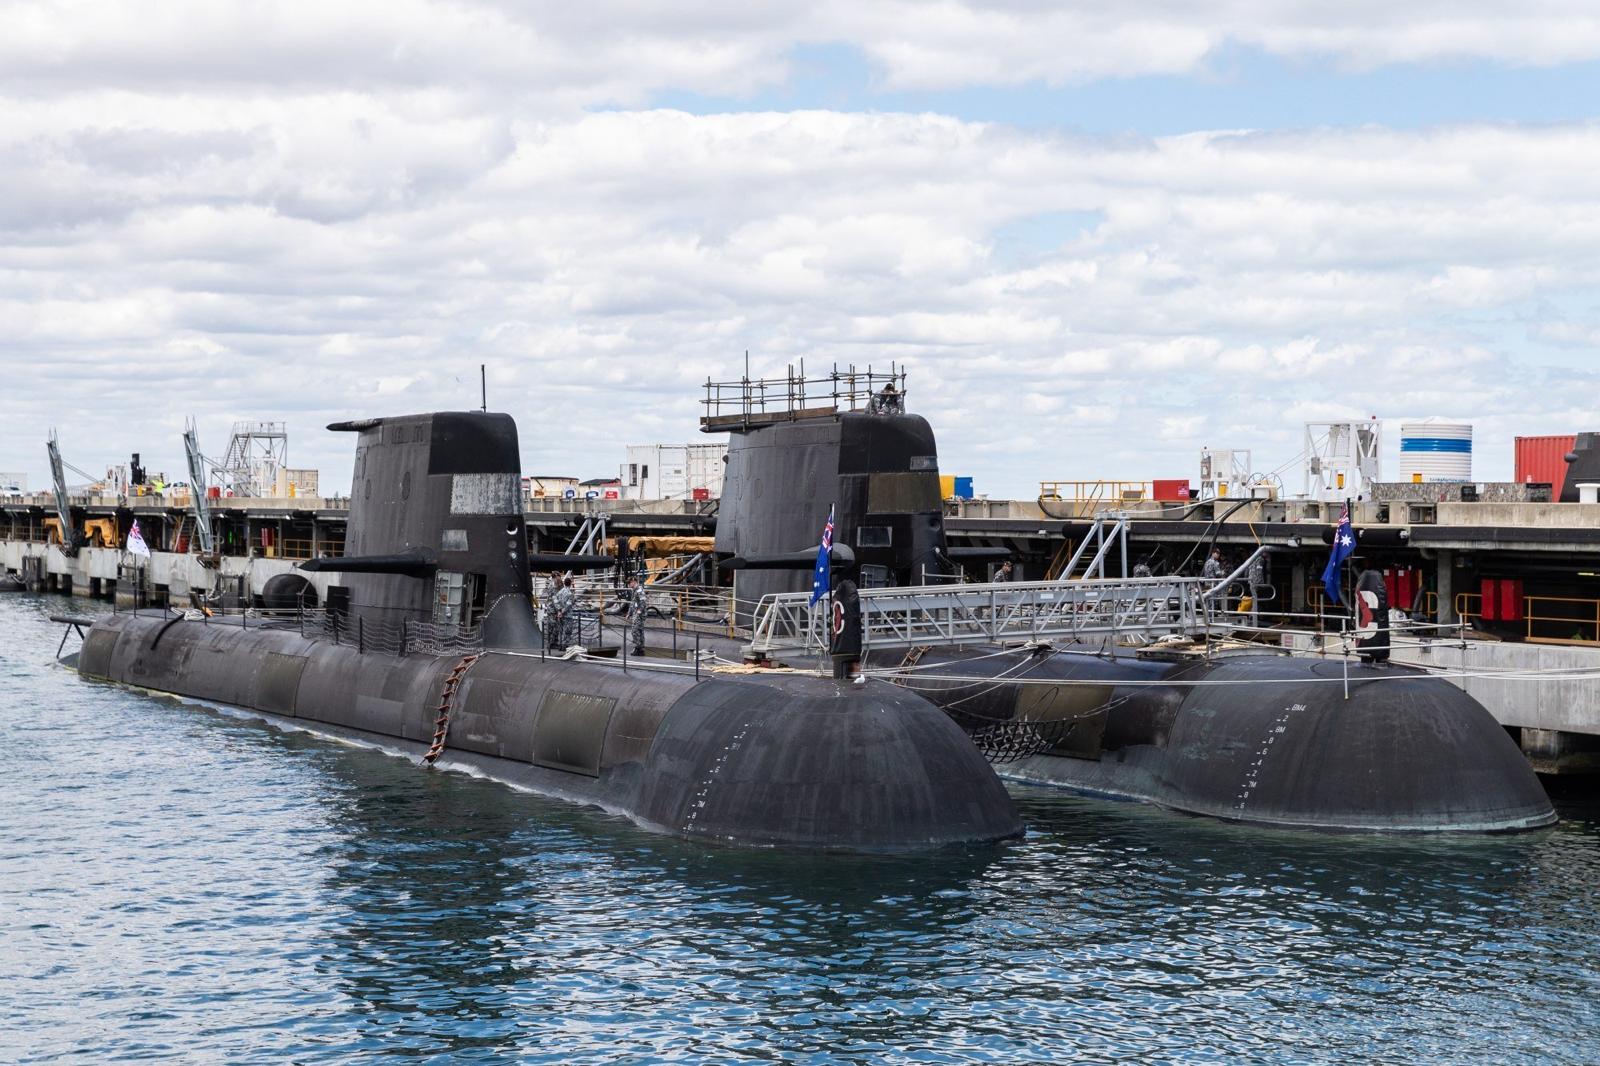 Diesel-powered submarines are seen docked at a naval base in Perth. The Aukus alliance allows for the sharing of nuclear-submarine technology. Photo: EPA-EFE.